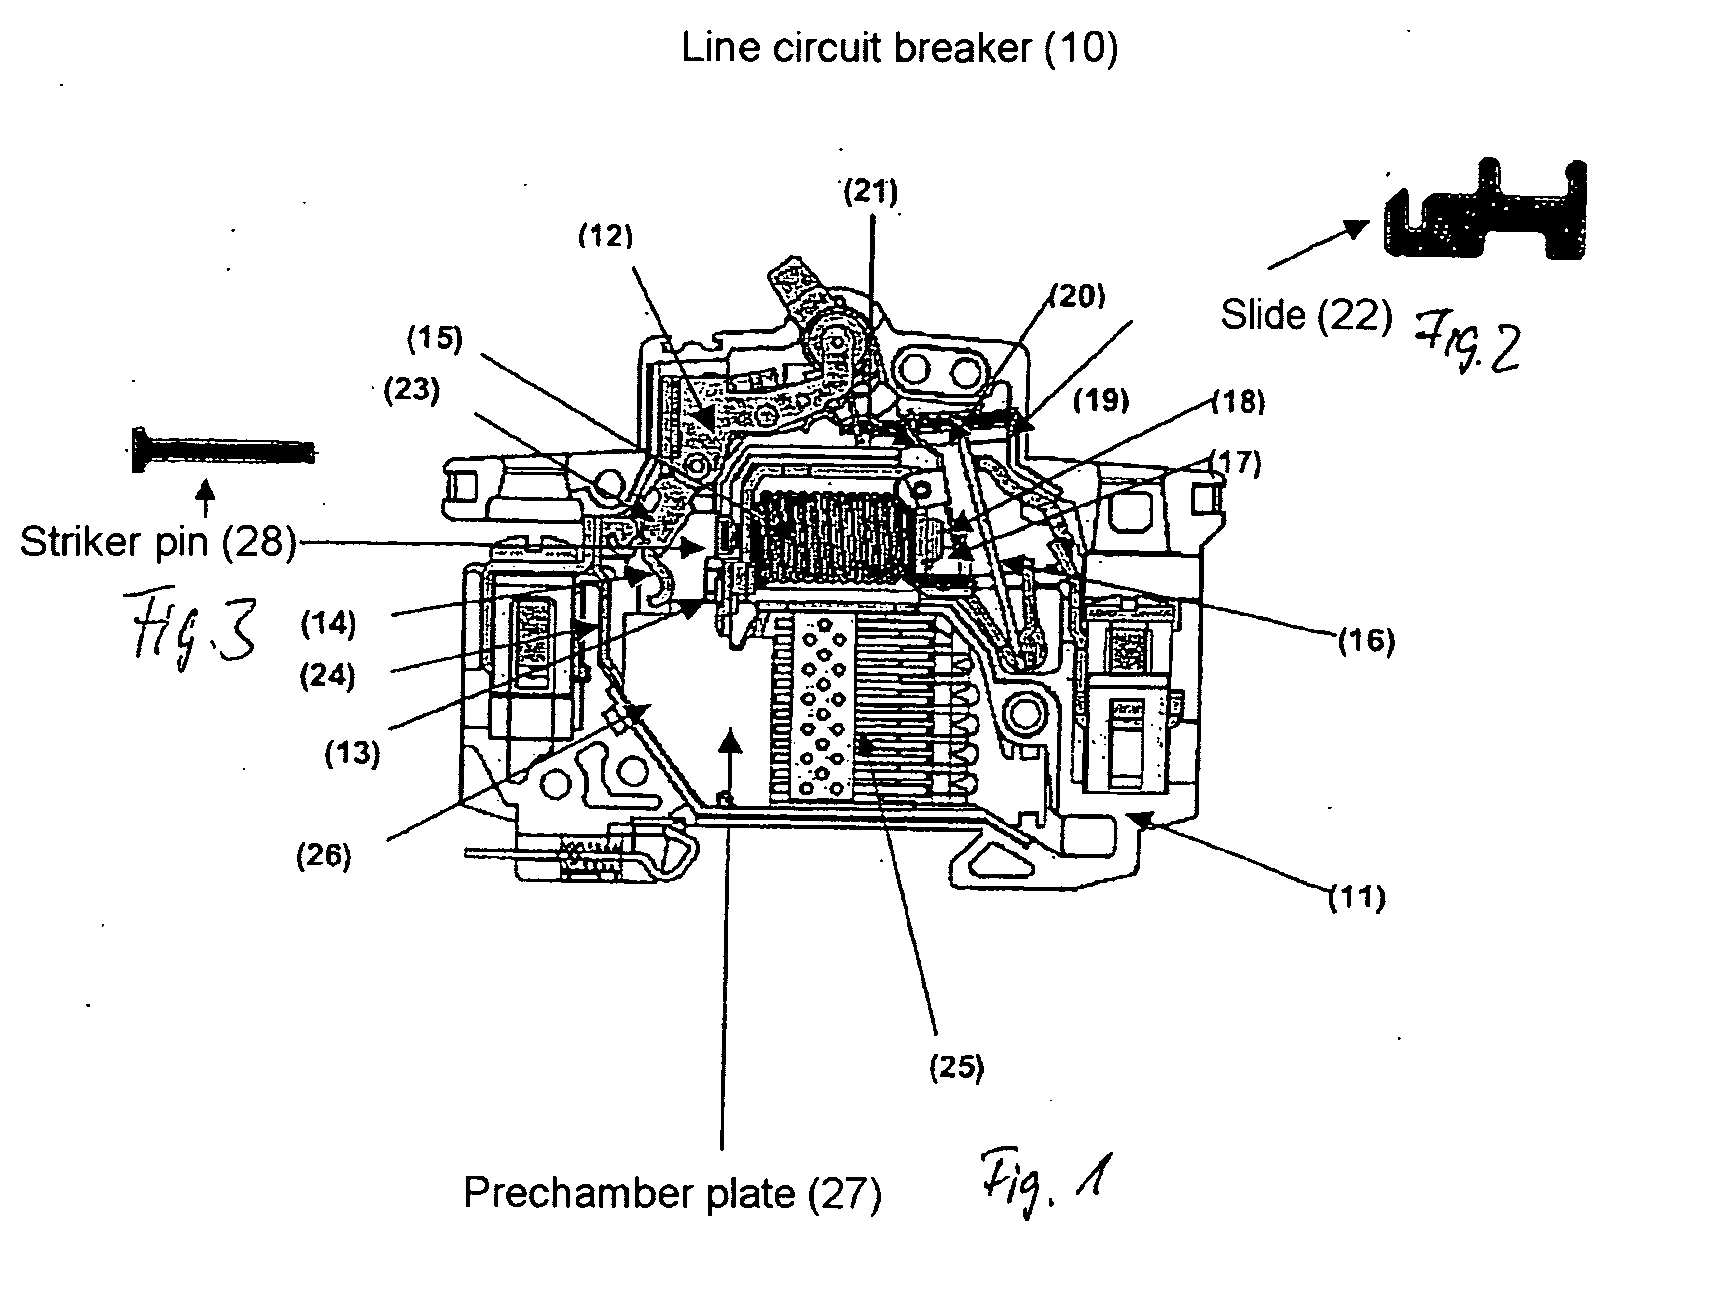 Radiation-crosslinked thermoplastics in an electrical installation switching device